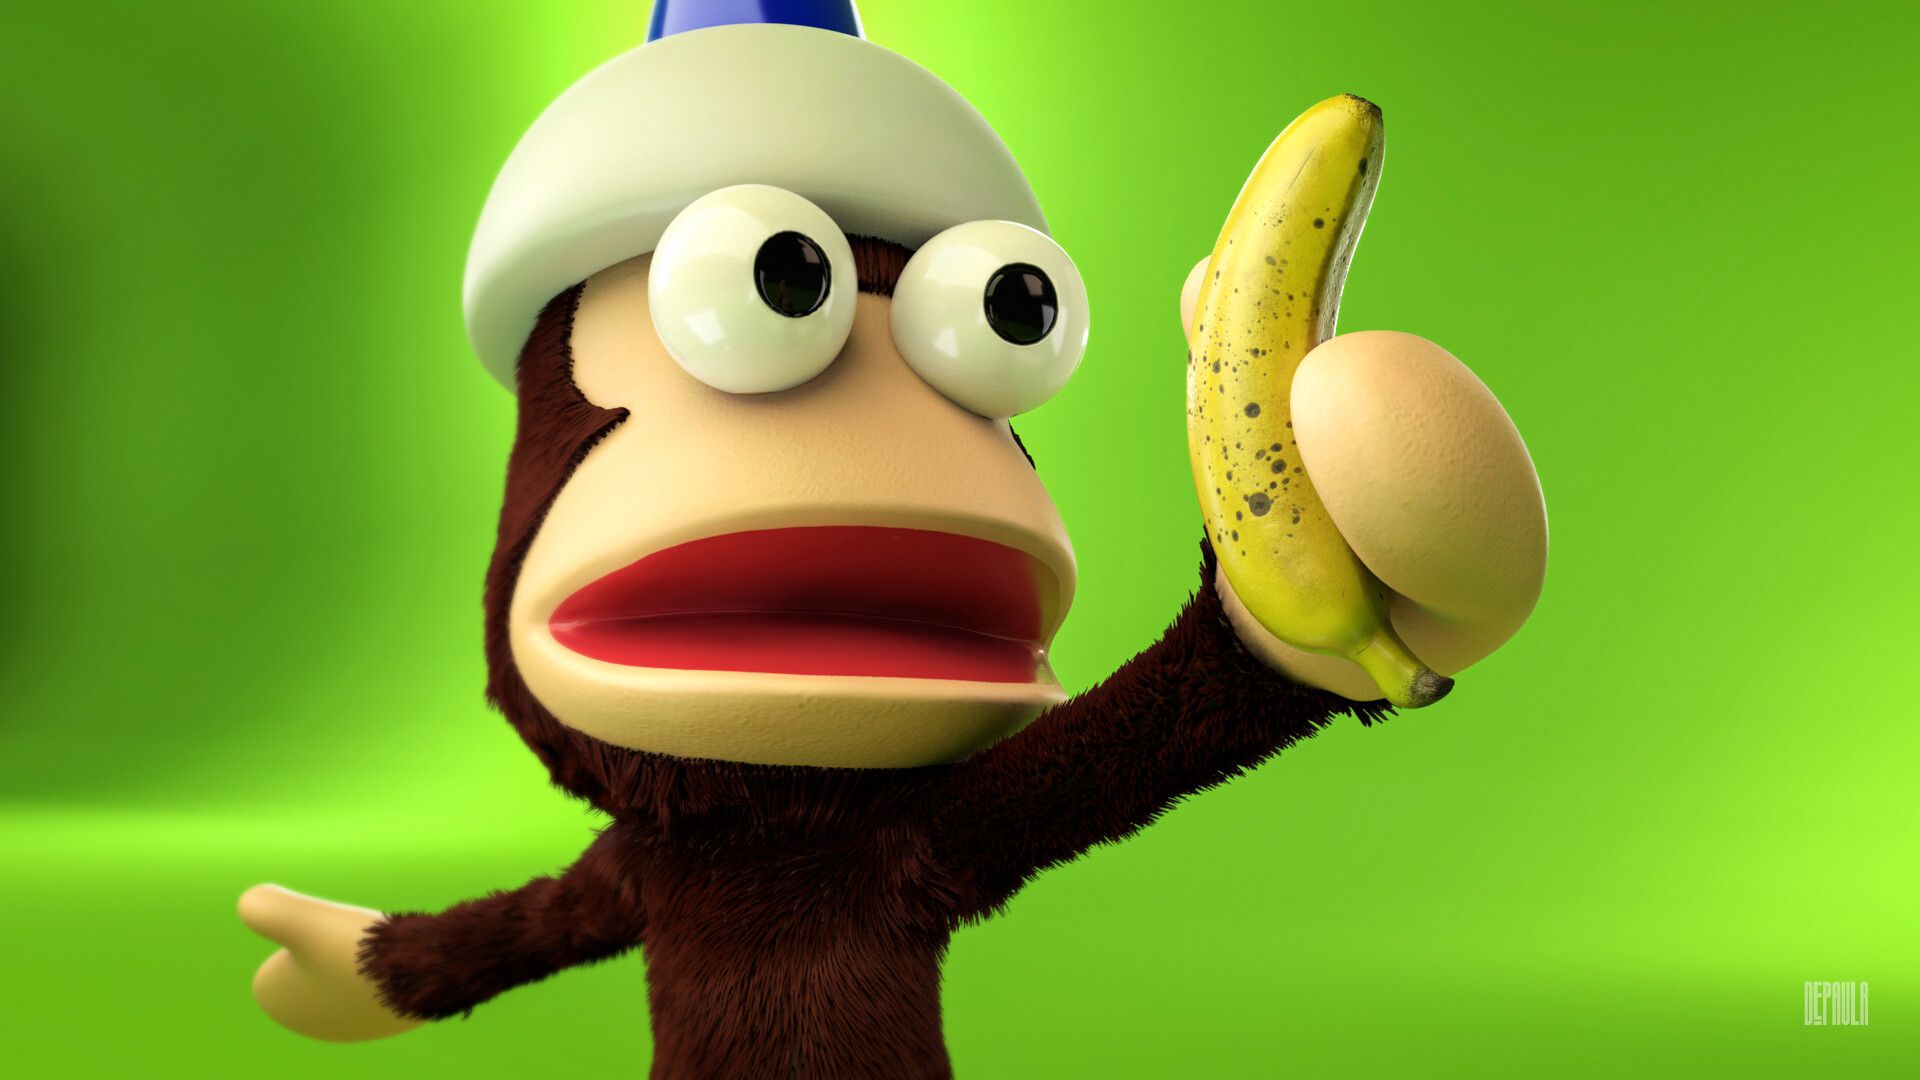 Justin Yahoudy on ape escape in 2021